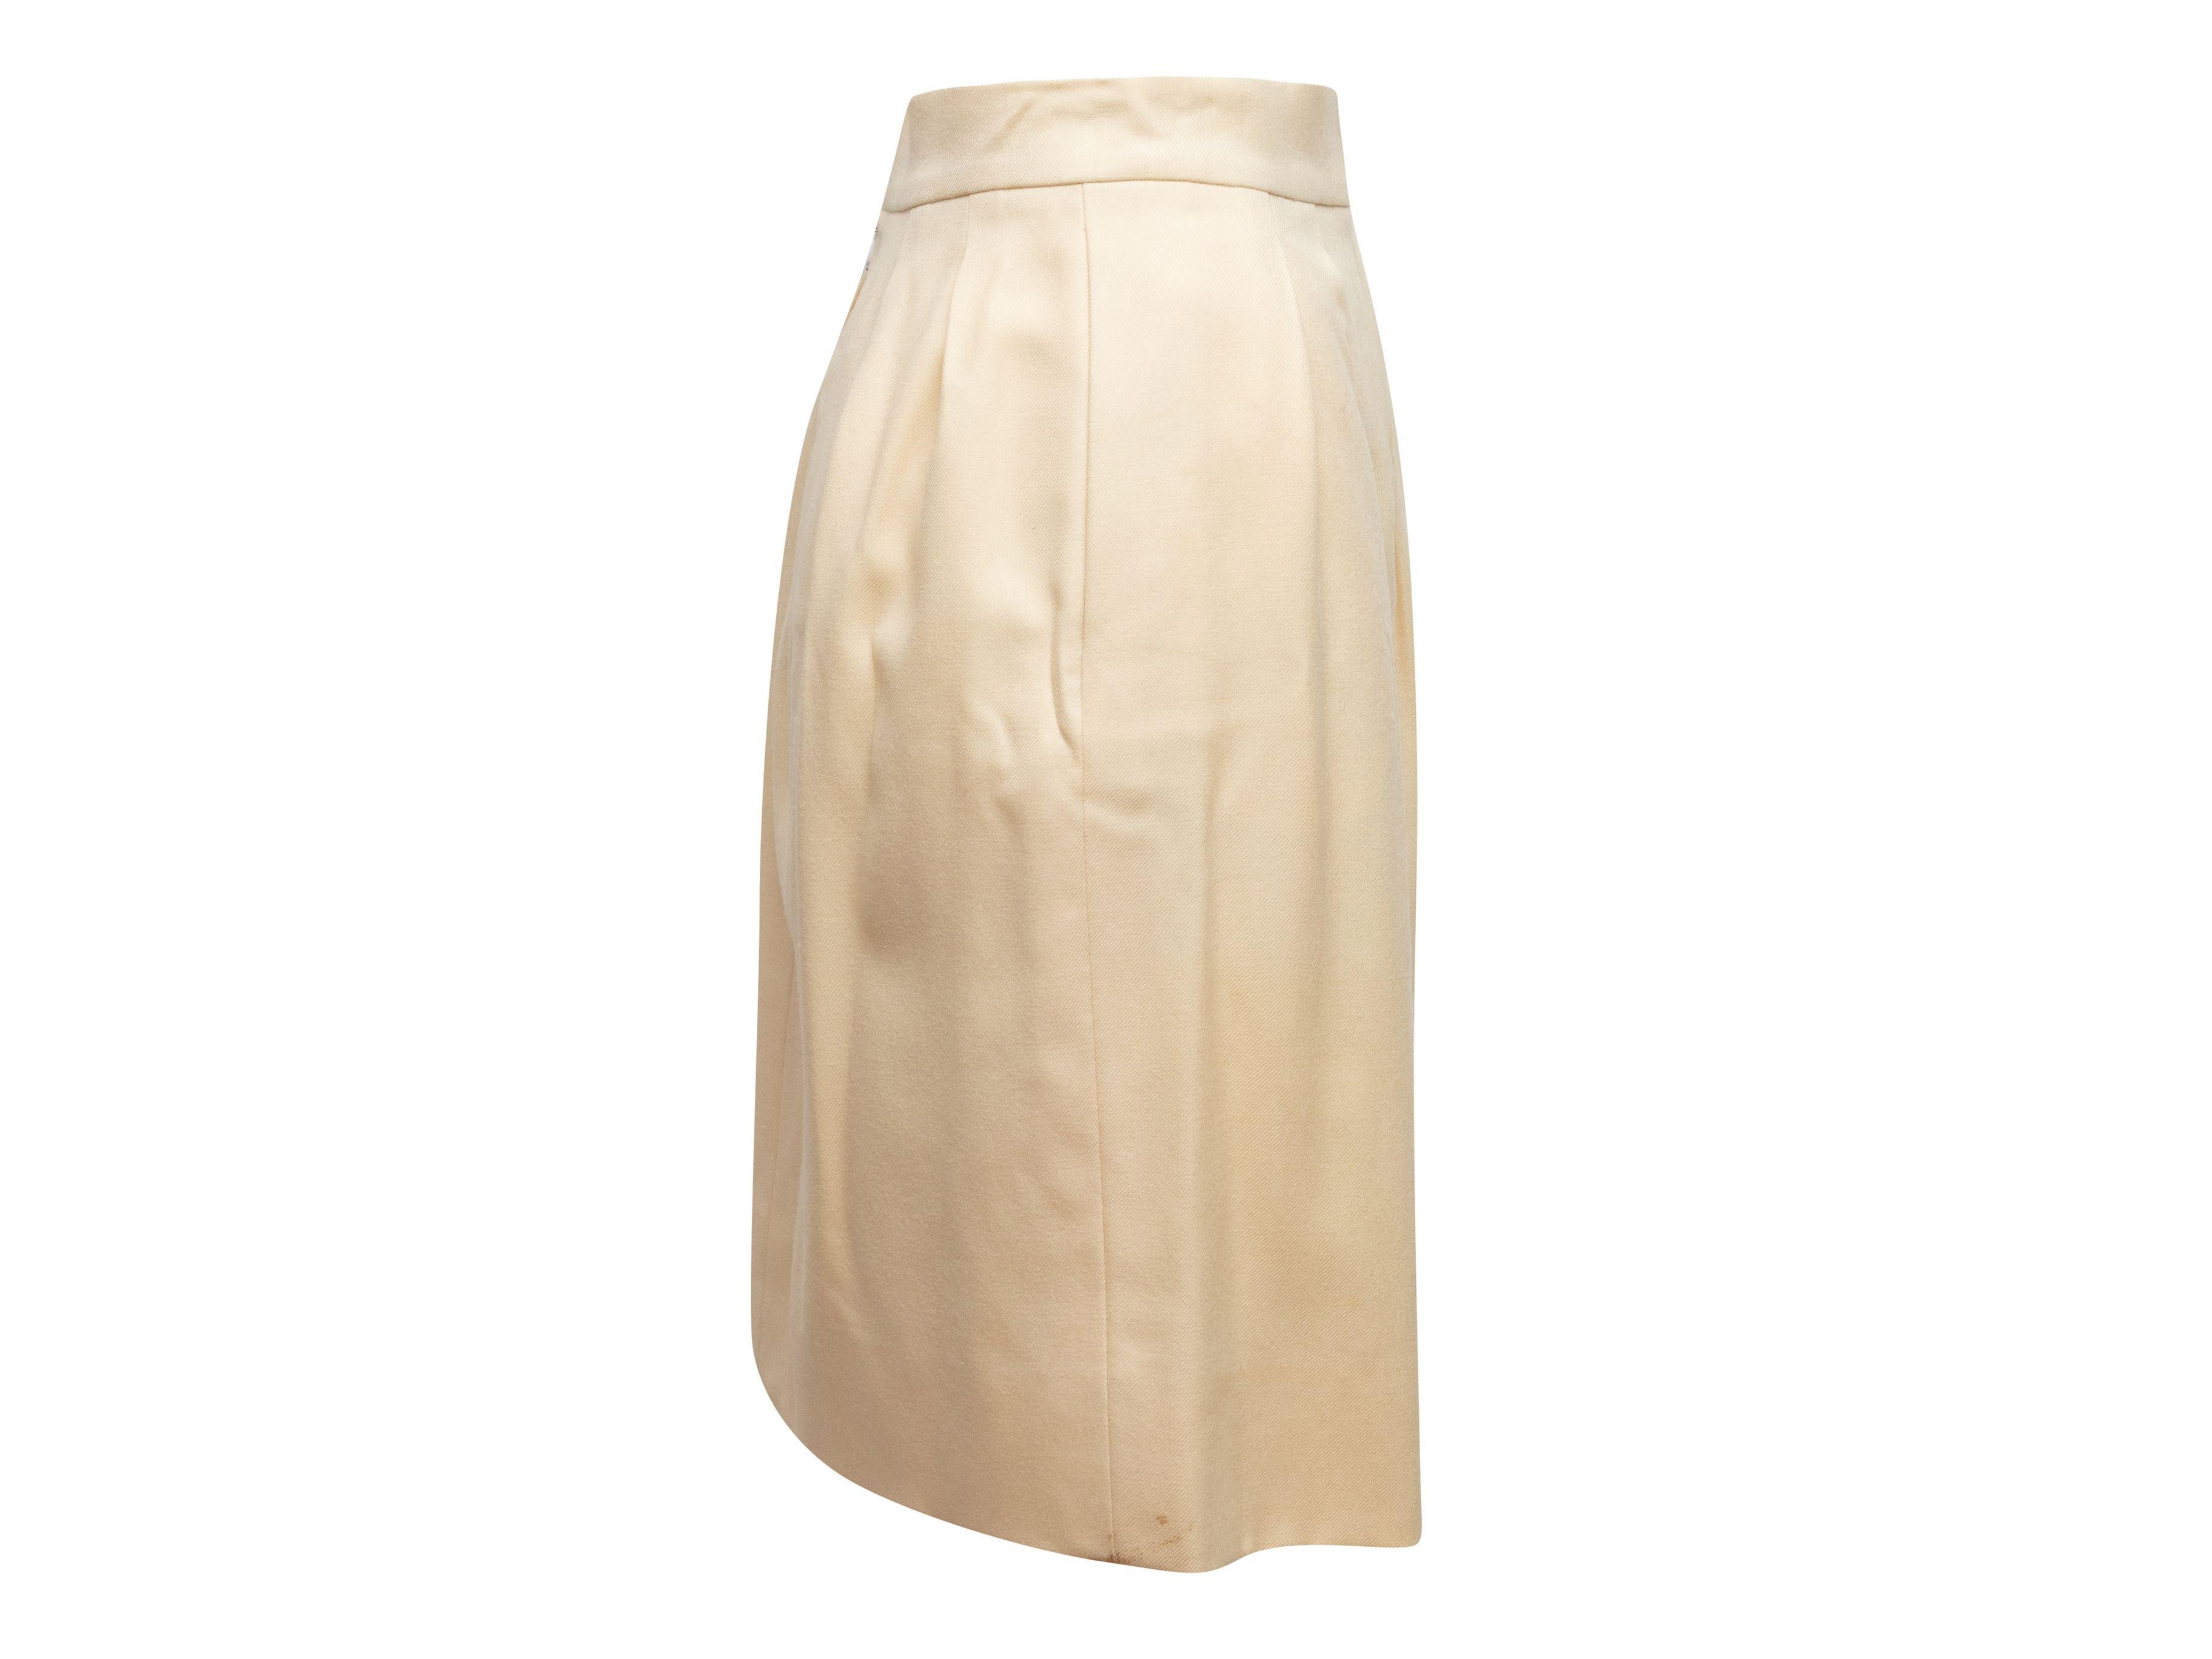 Chanel Boutique Cream Wool Knee-Length Skirt In Good Condition For Sale In New York, NY